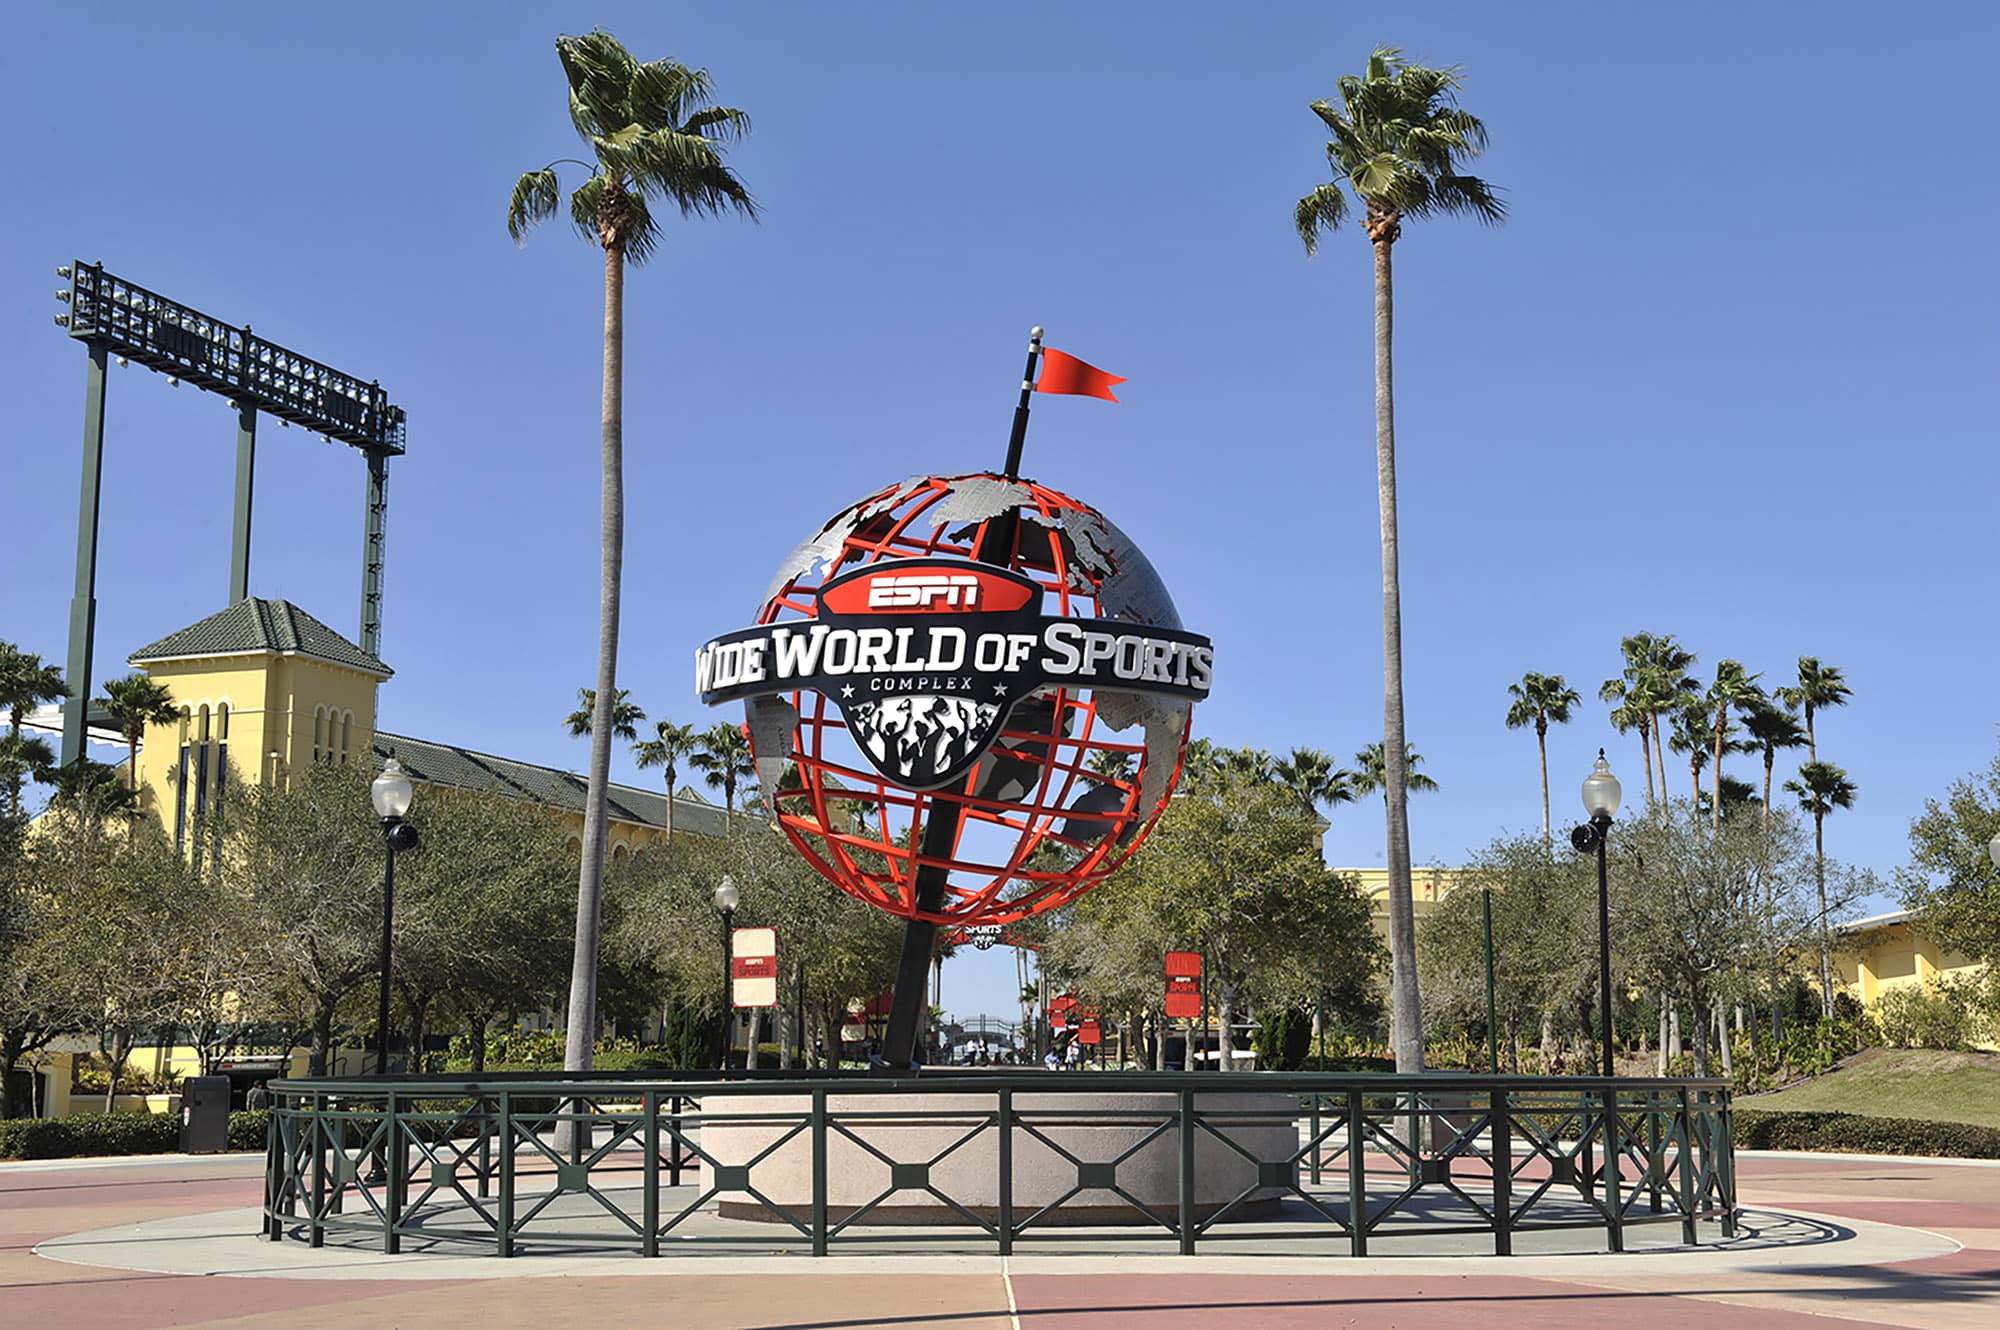 Disney World’s ESPN Wide World of Sports to Host Tampa Bay Rays Spring